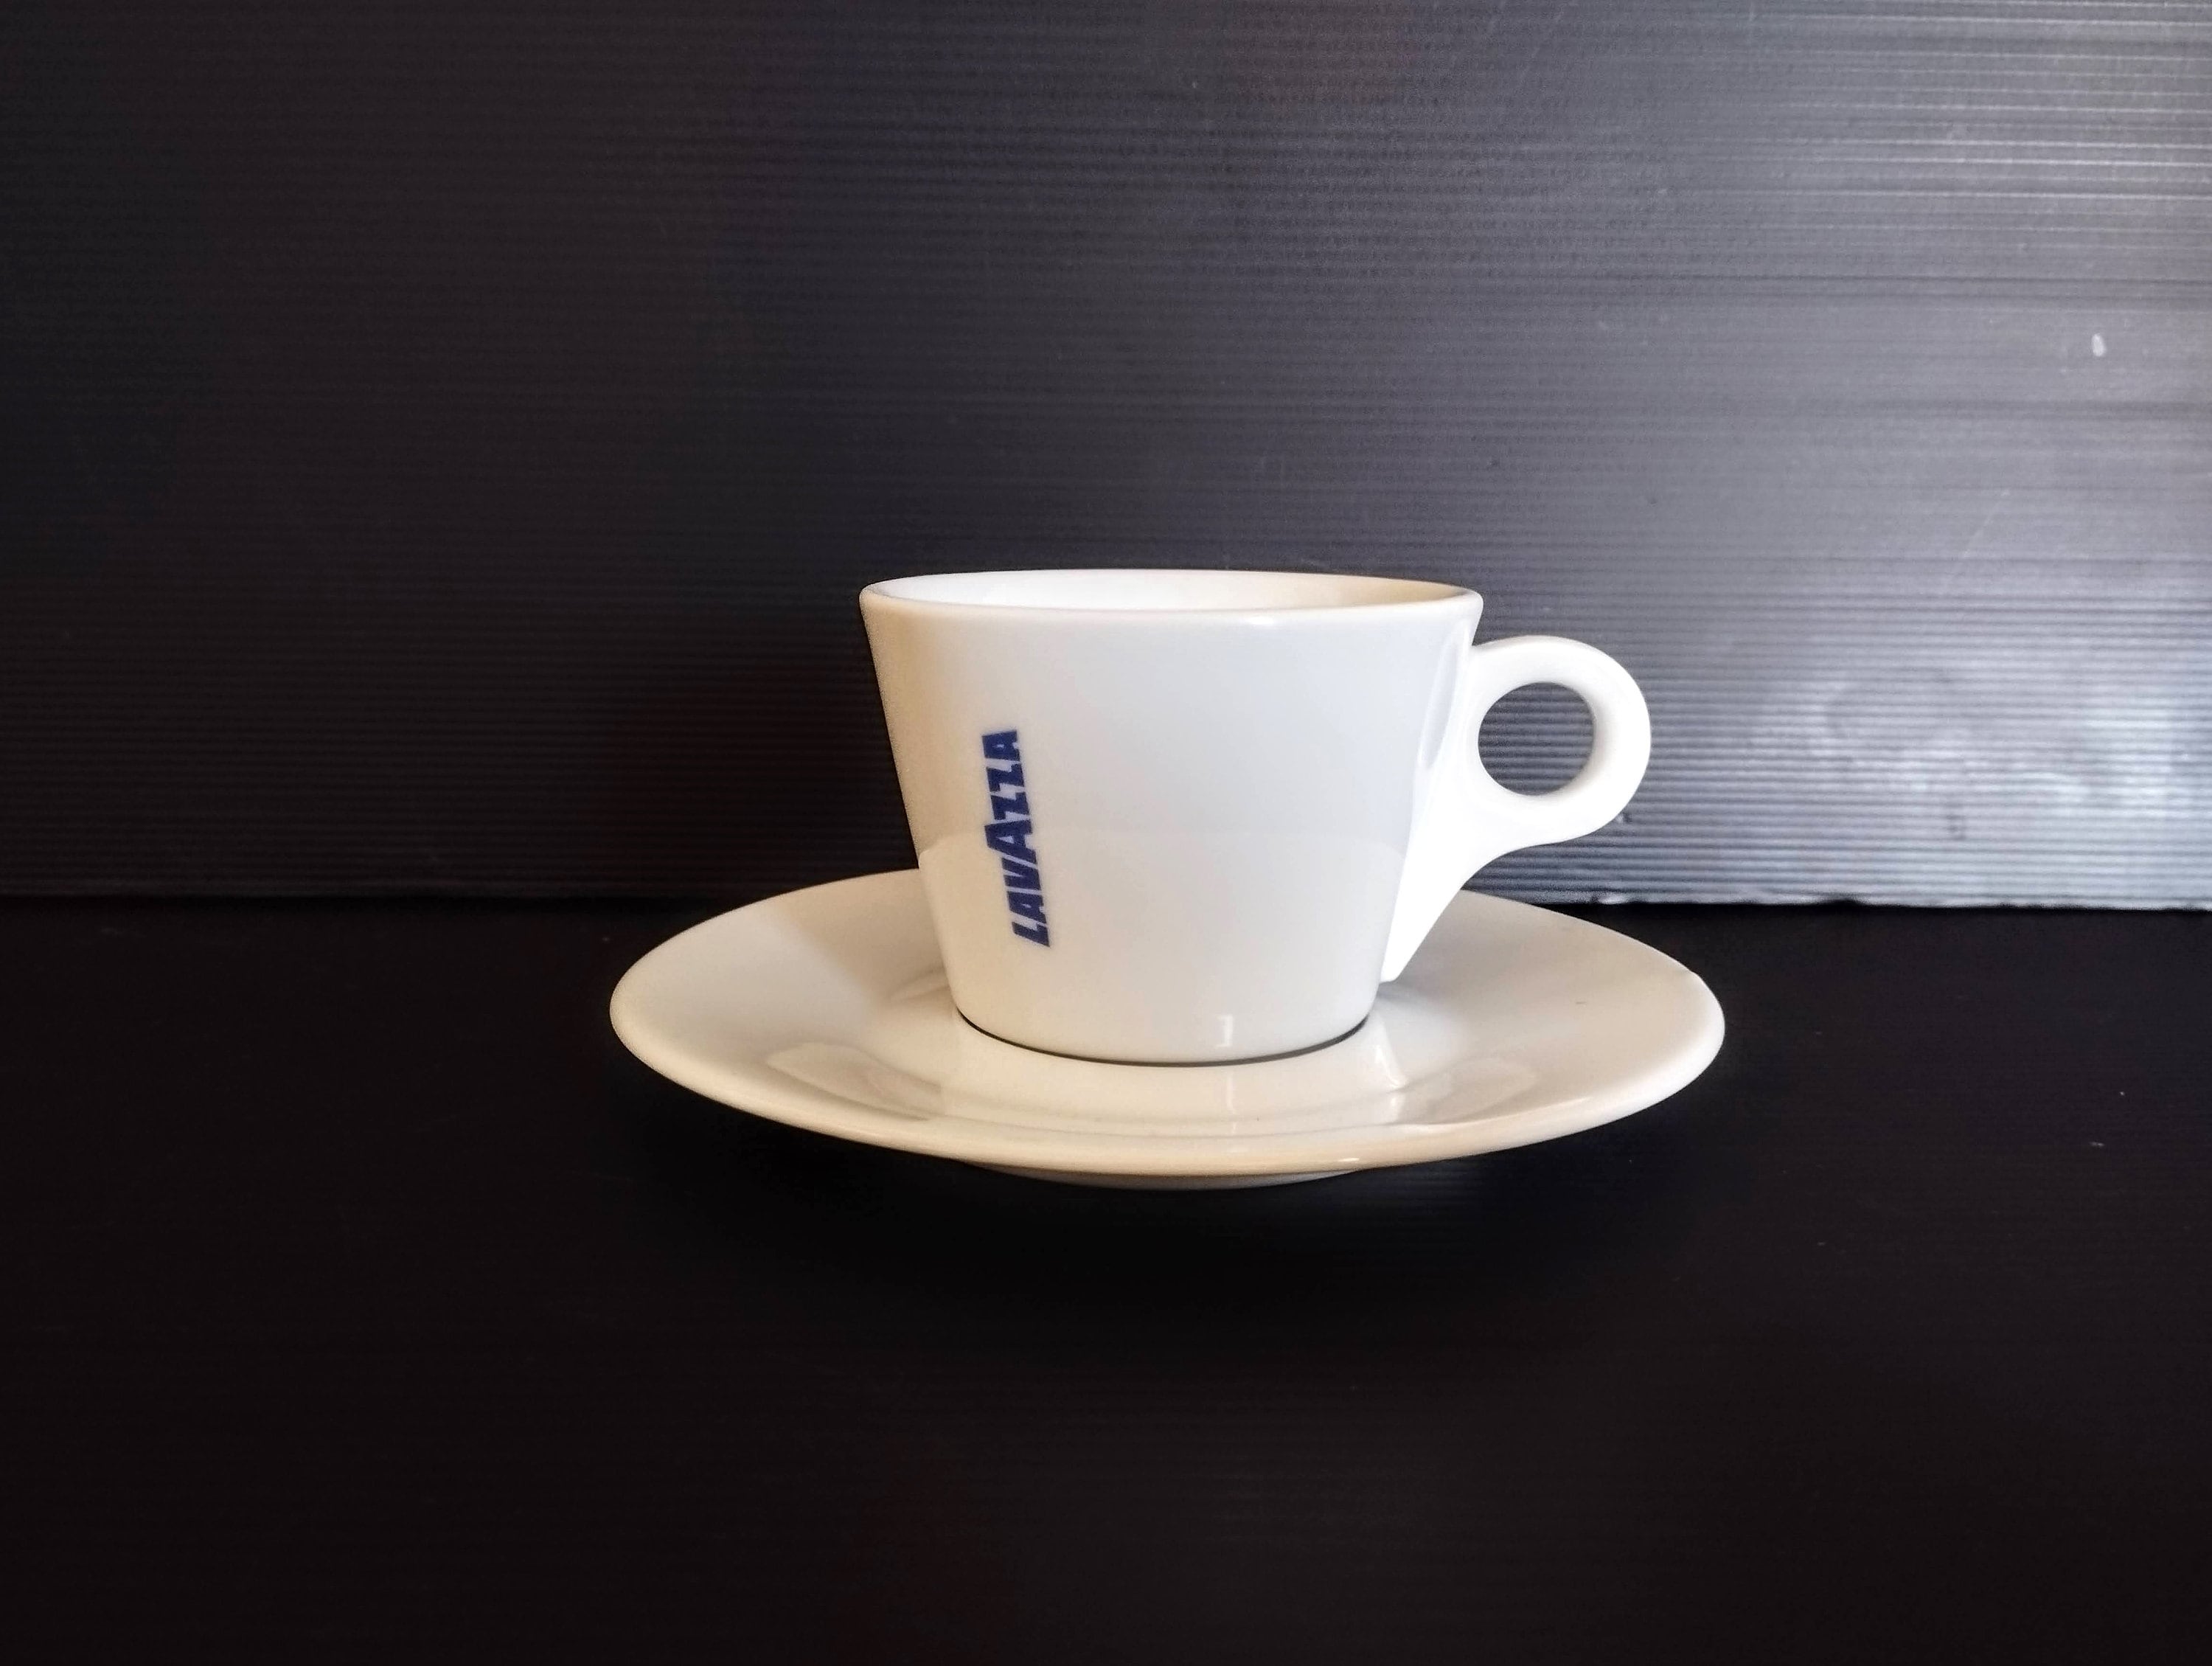 2 Classic Coffee Lavazza Blue Espresso Cups, White Porcelain Cups, Vintage  Bar Lavazza Cups, Made in Italy, Excellent Condition 